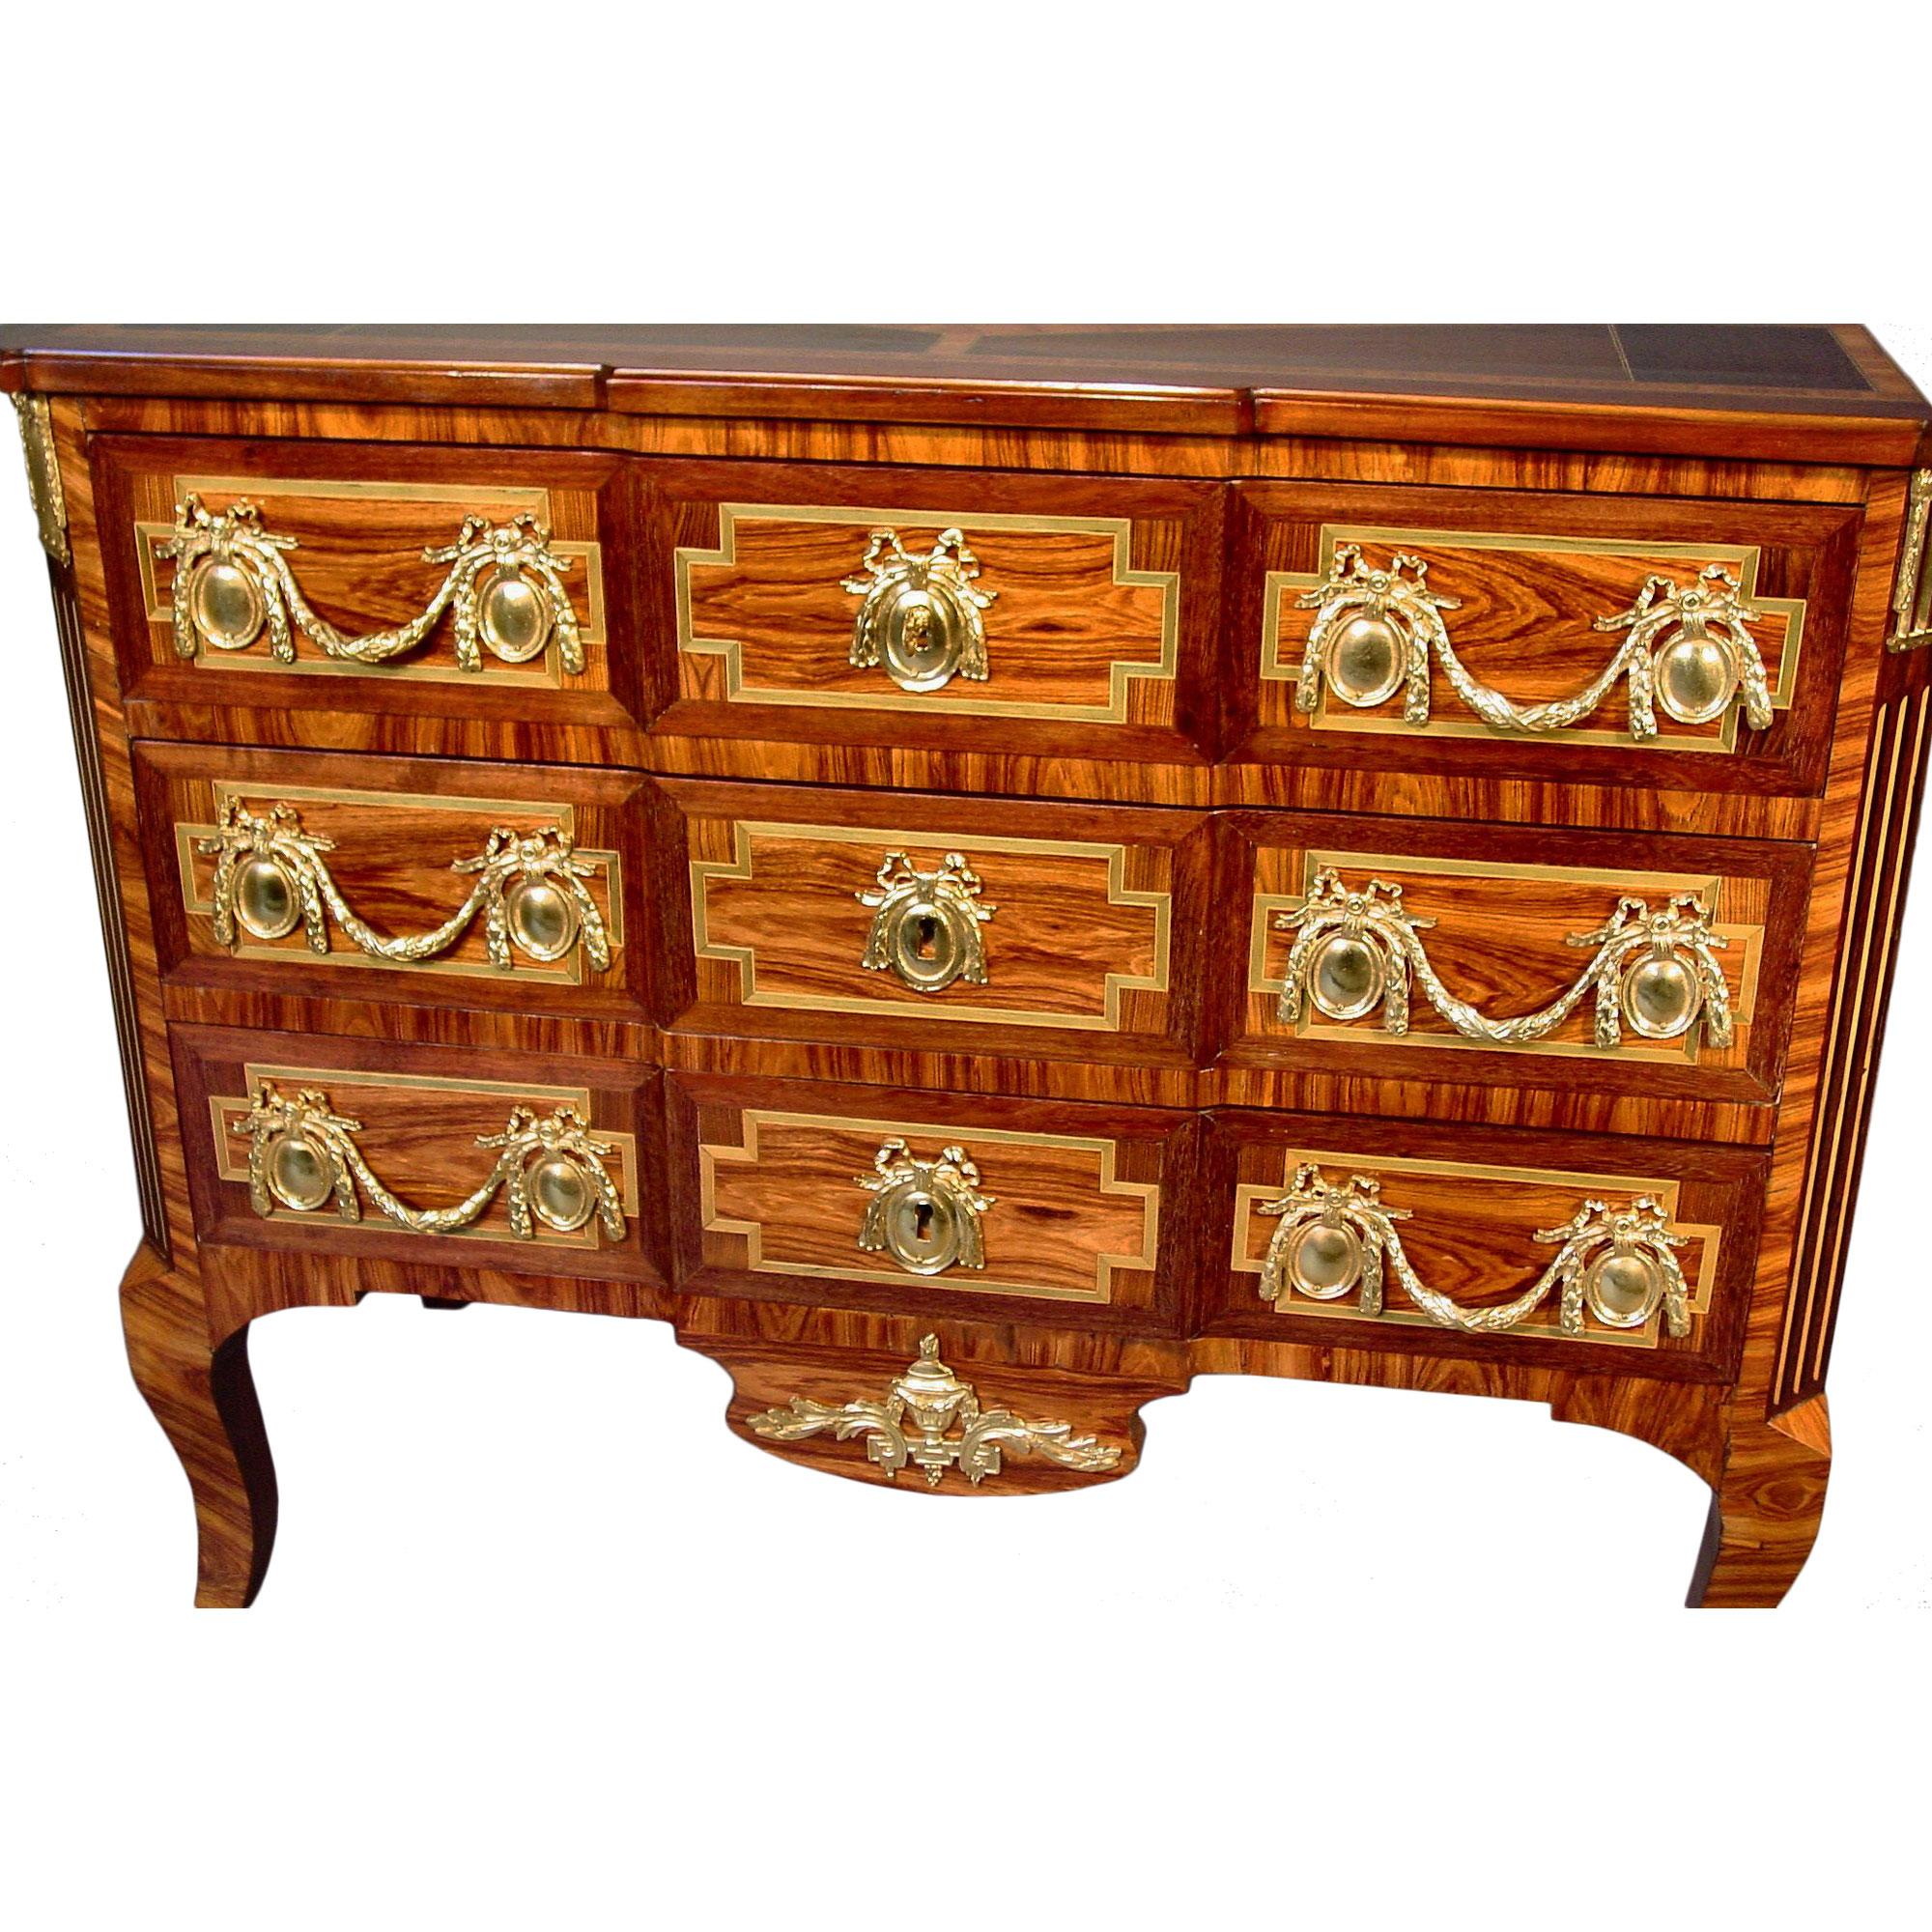 A fine 19th century French Transitional style three-drawer chest with a parquetry top in the shape of a diamond. The chest is ornamented with elaborate ormolu mounts with bows on the handles and floral garlands. The chest is inlaid with tulipwood,